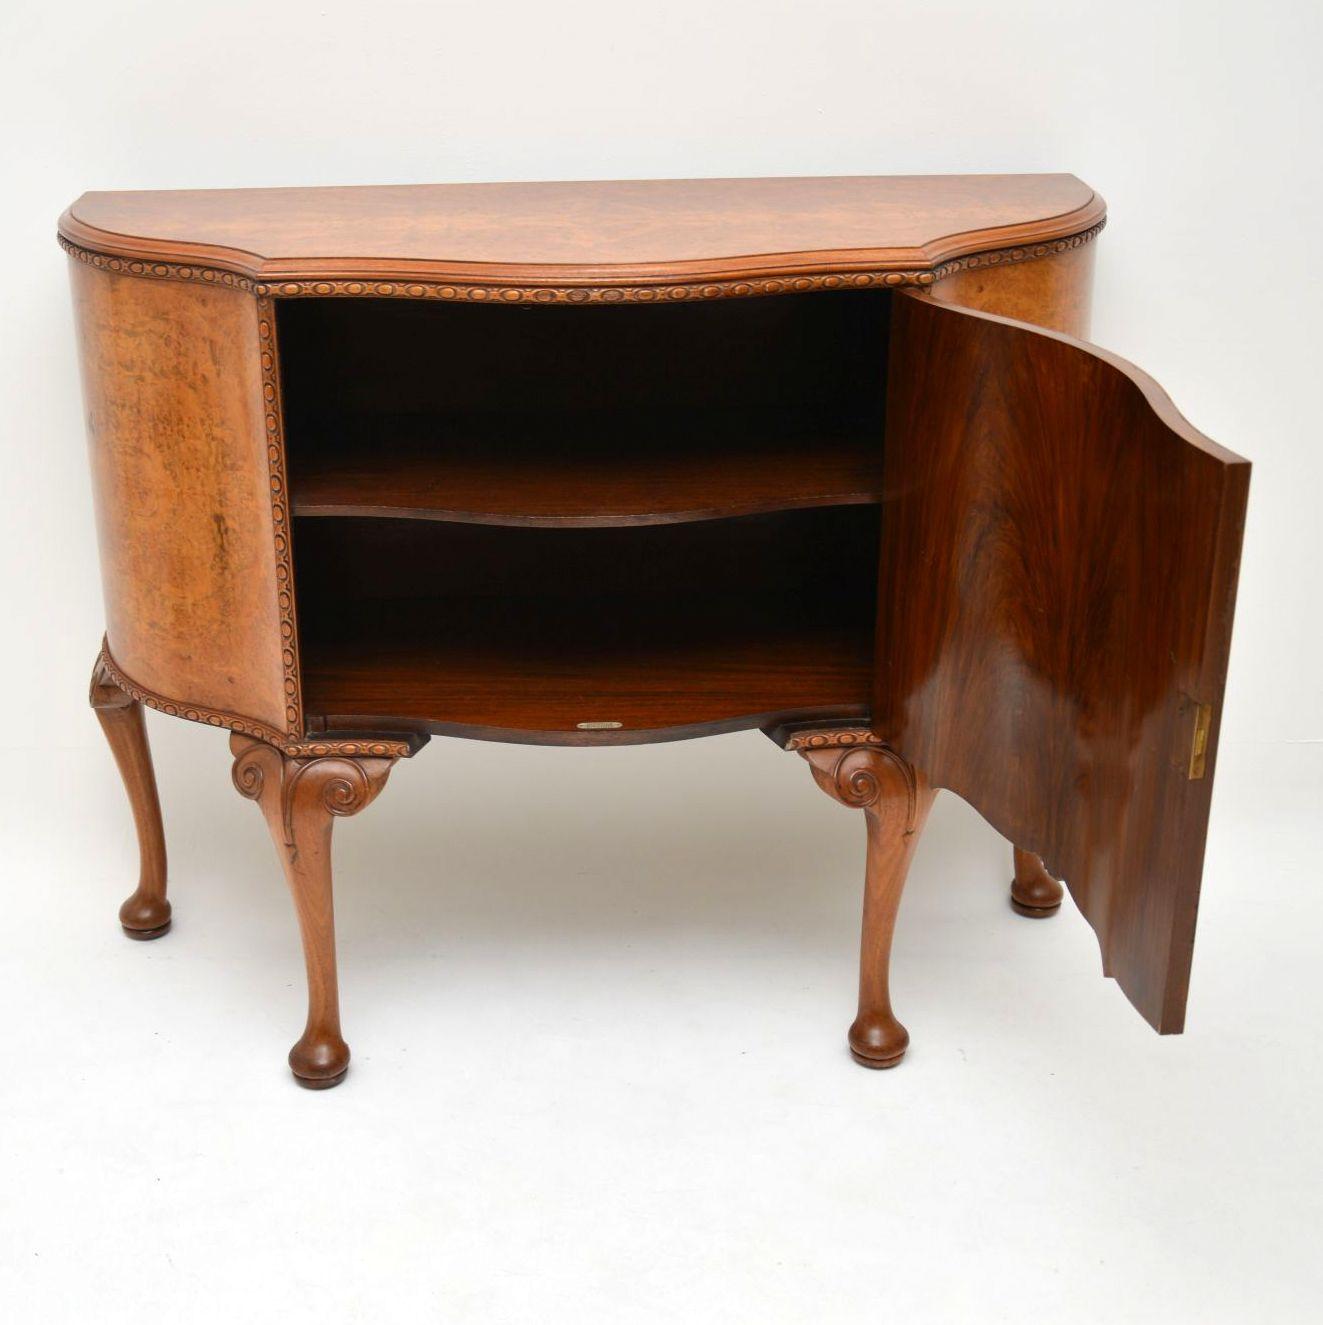 Early 20th Century Antique Queen Anne Style Burr Walnut Cabinet